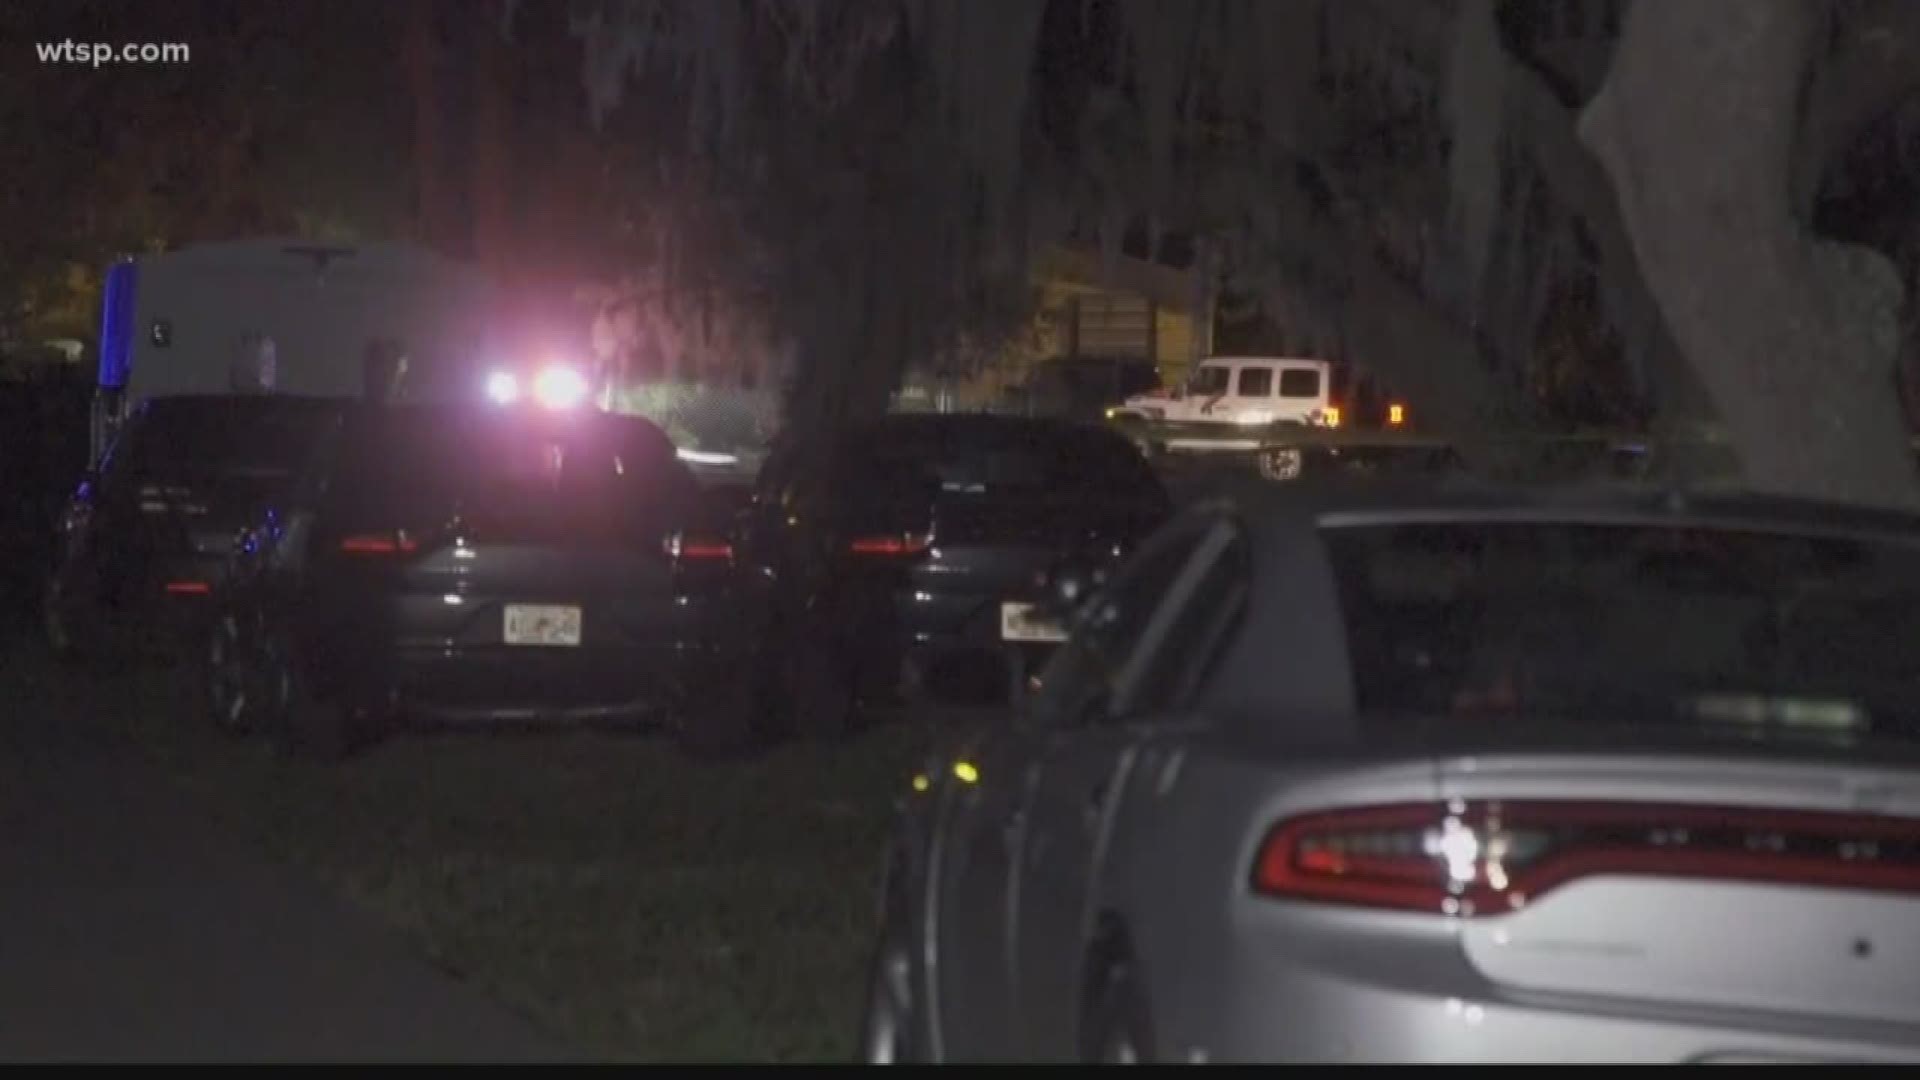 The Hillsborough County Sheriff’s Office is investigating a deadly shooting in Wimauma.